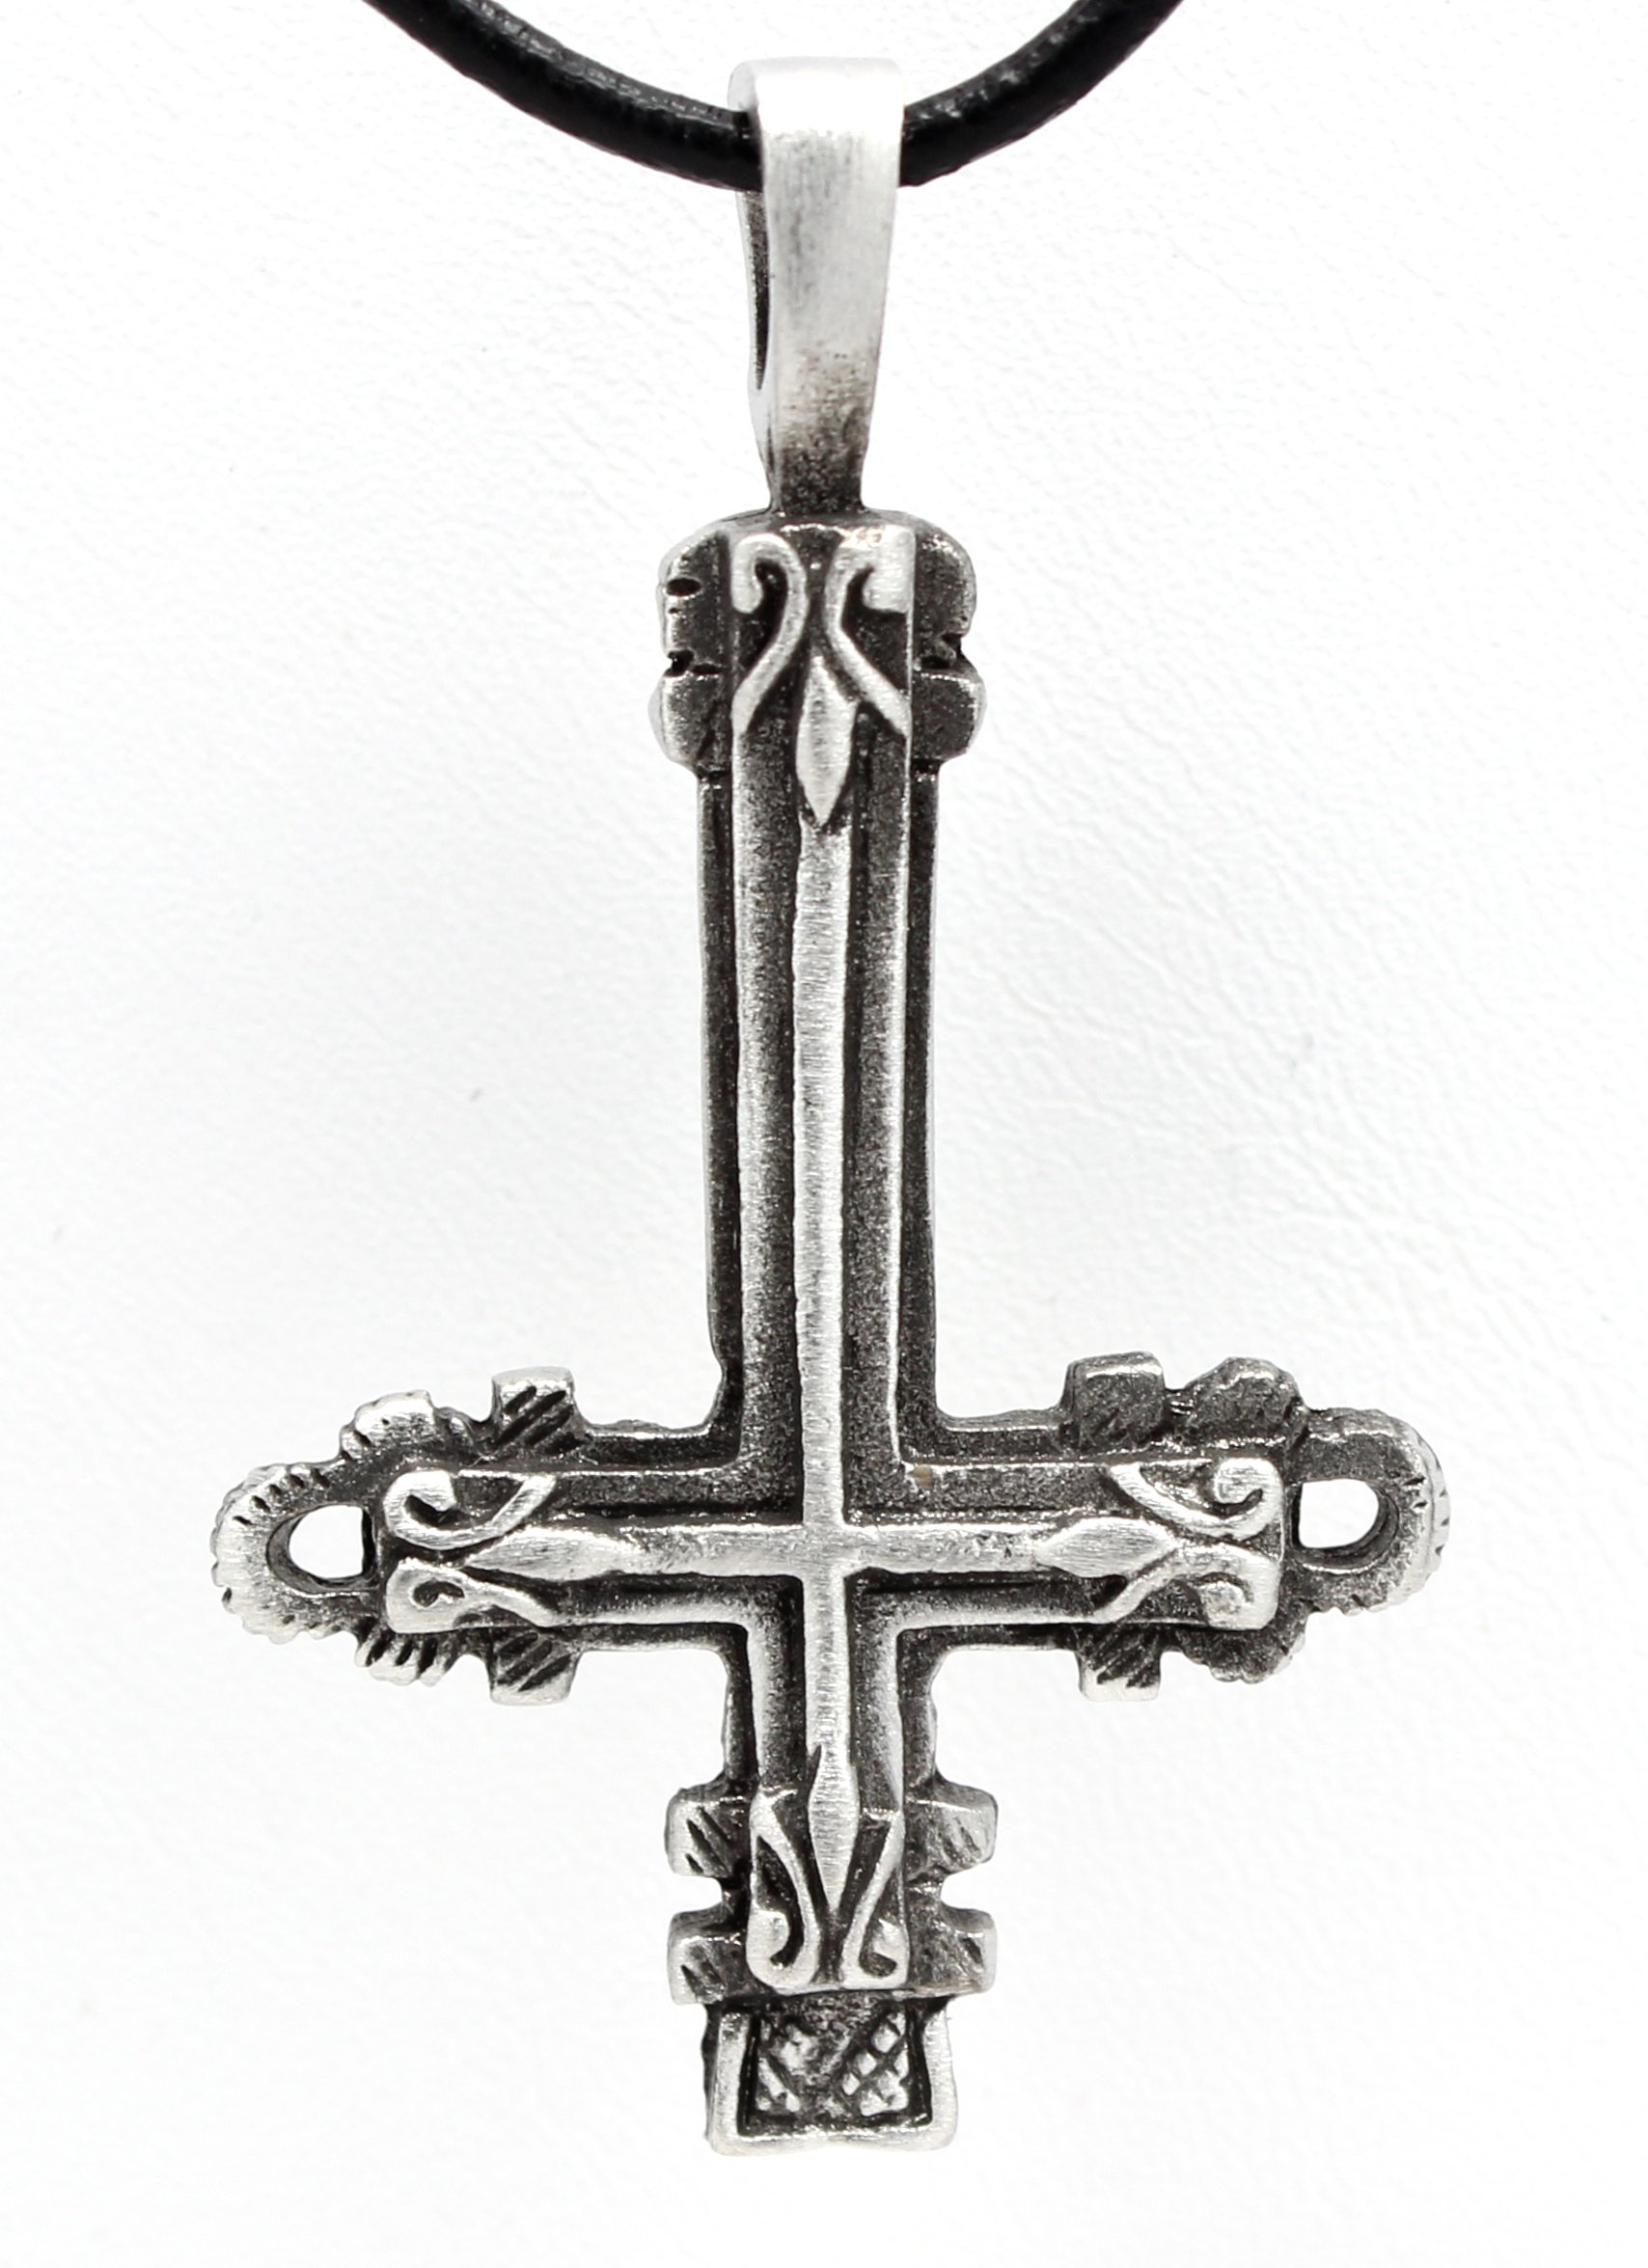 Trilogy Jewelry Pewter Inverted Gothic St. Peter's Cross Pendant on Leather Necklace